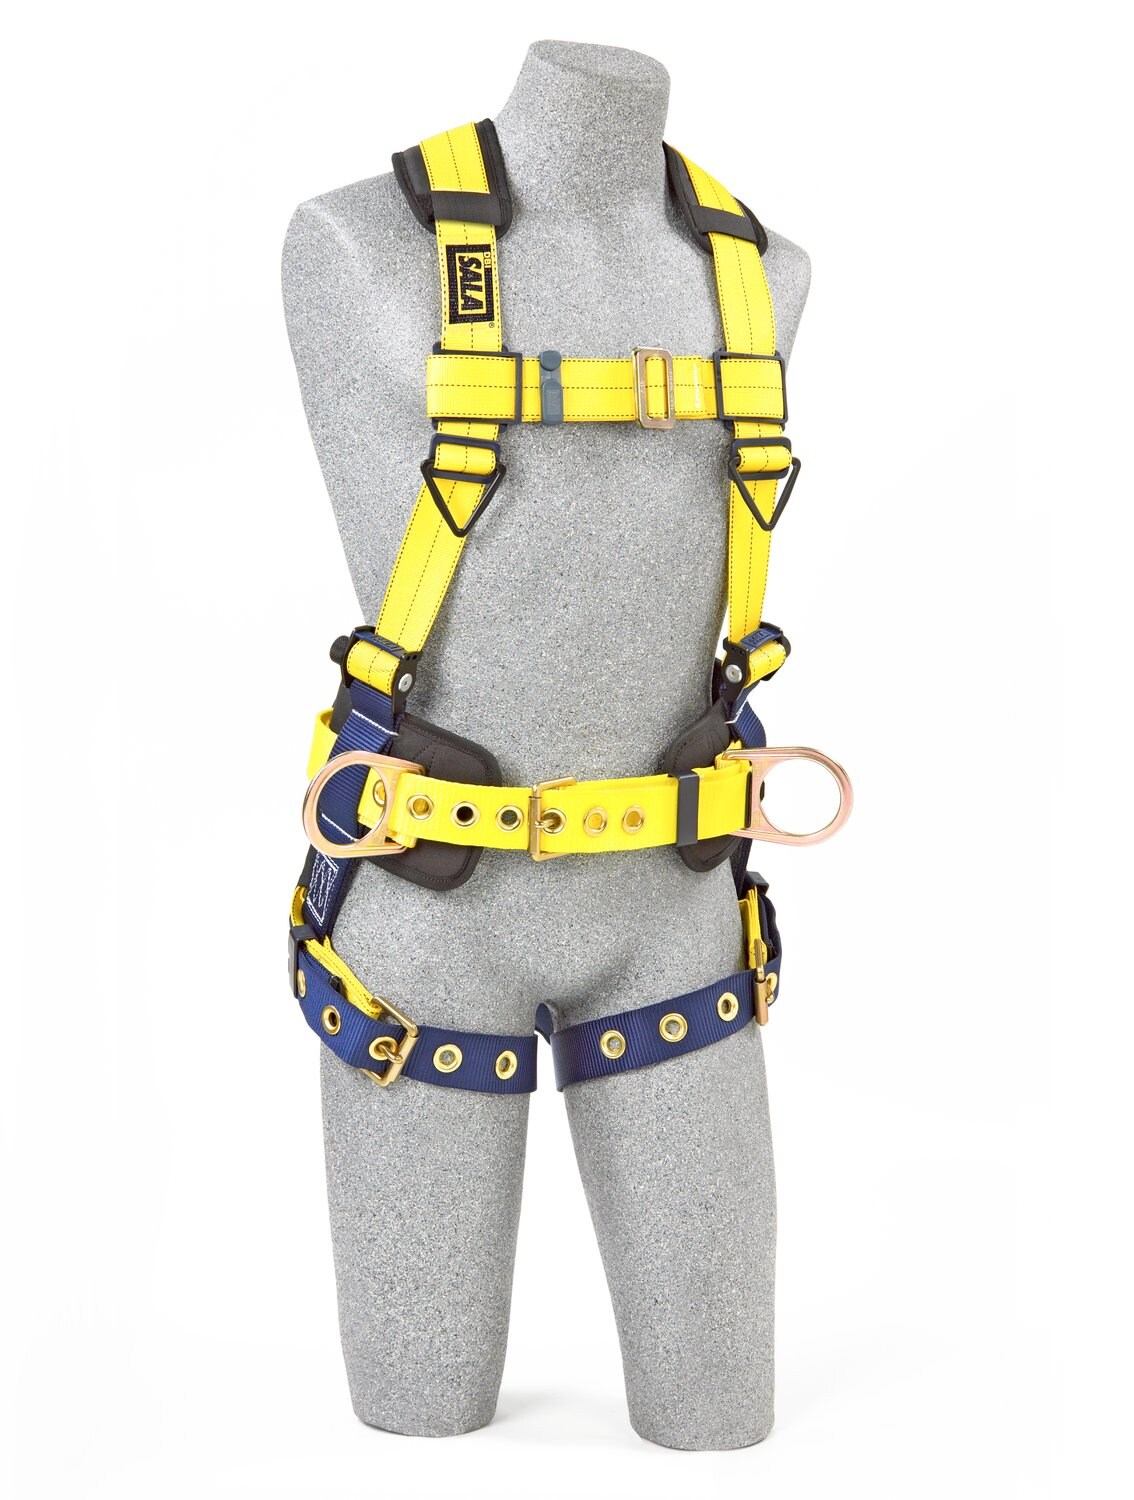 7100220241 - 3M DBI-SALA Delta Construction Positioning Safety Harness 1102201,
Small